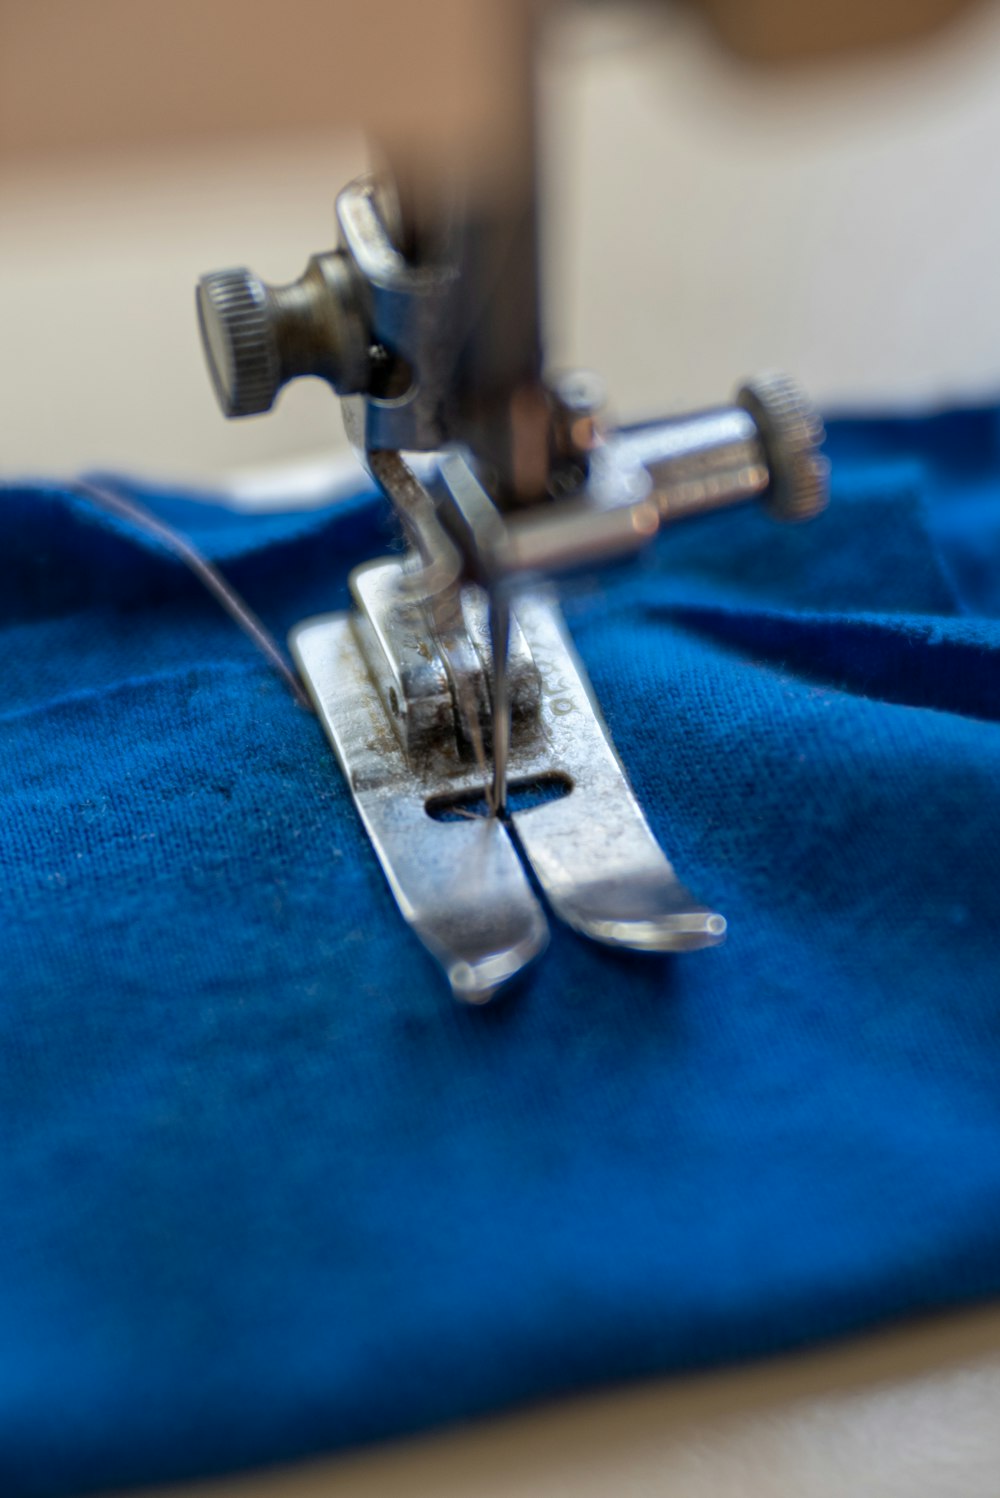 silver sewing machine on blue textile